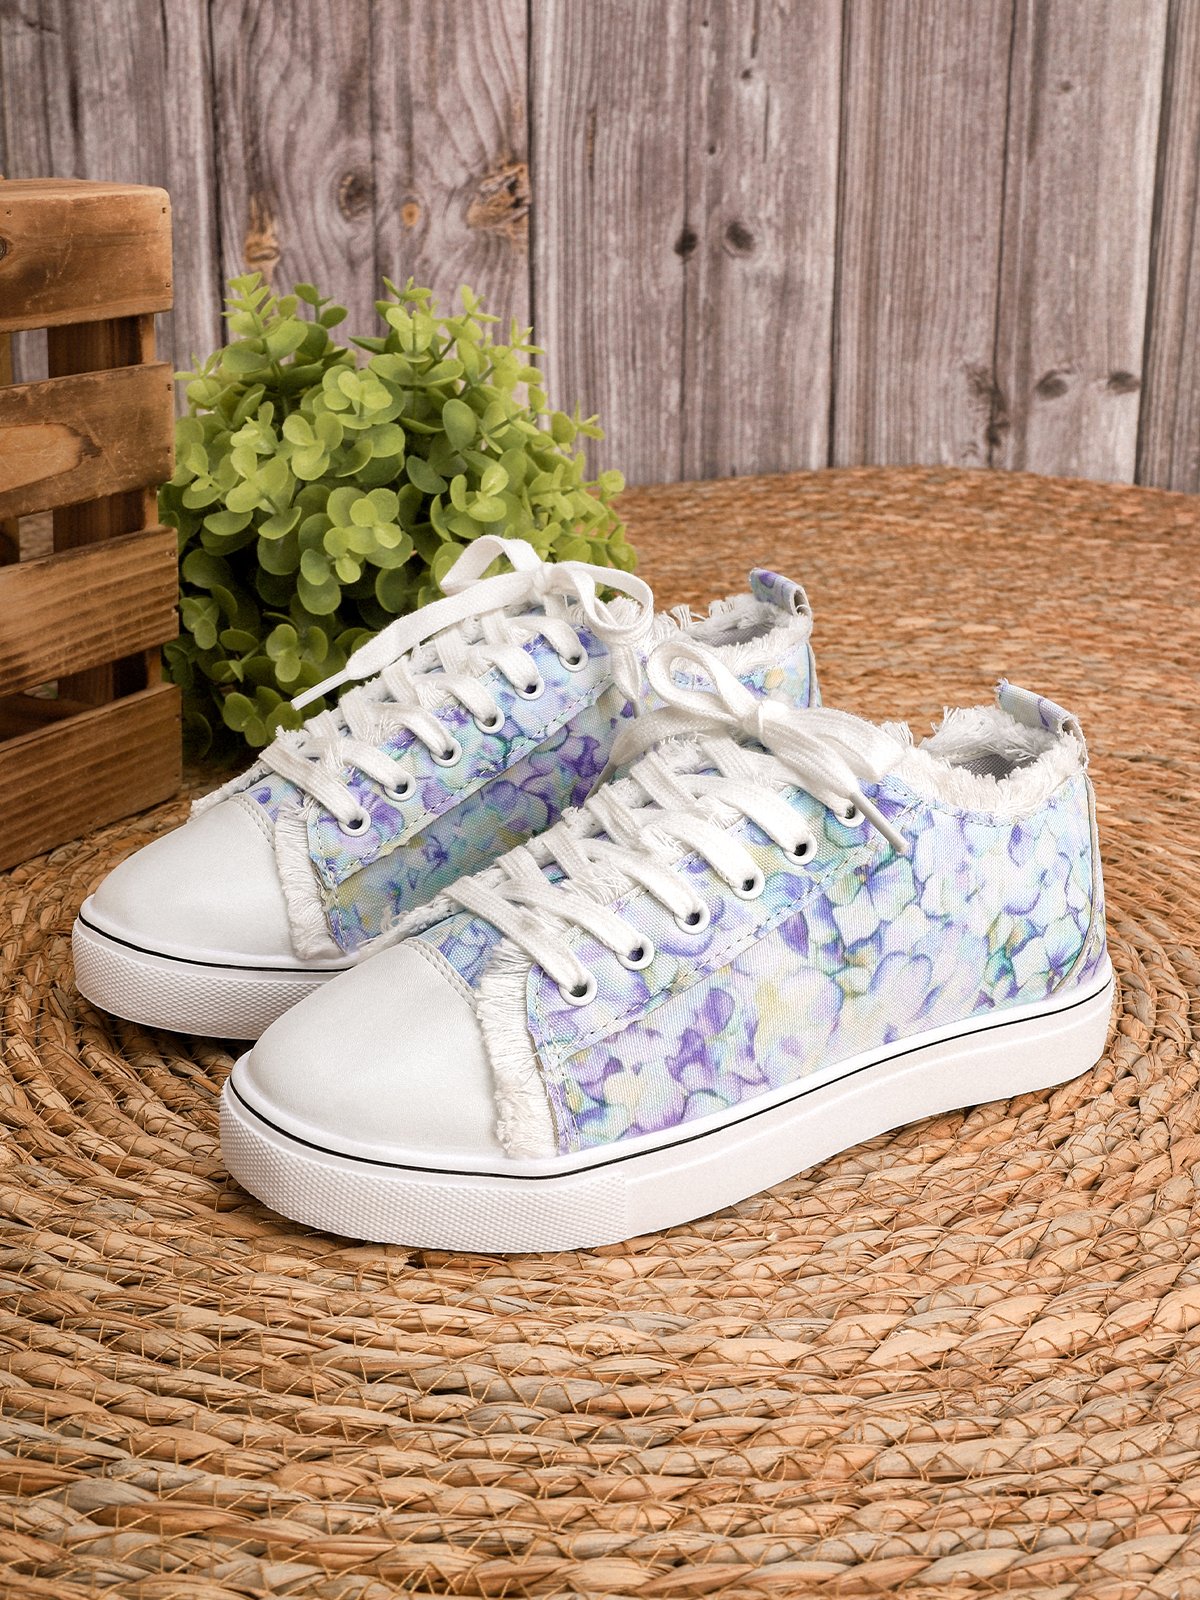 Lightweight Breathable Blue Floral Sneakers Espadrilles